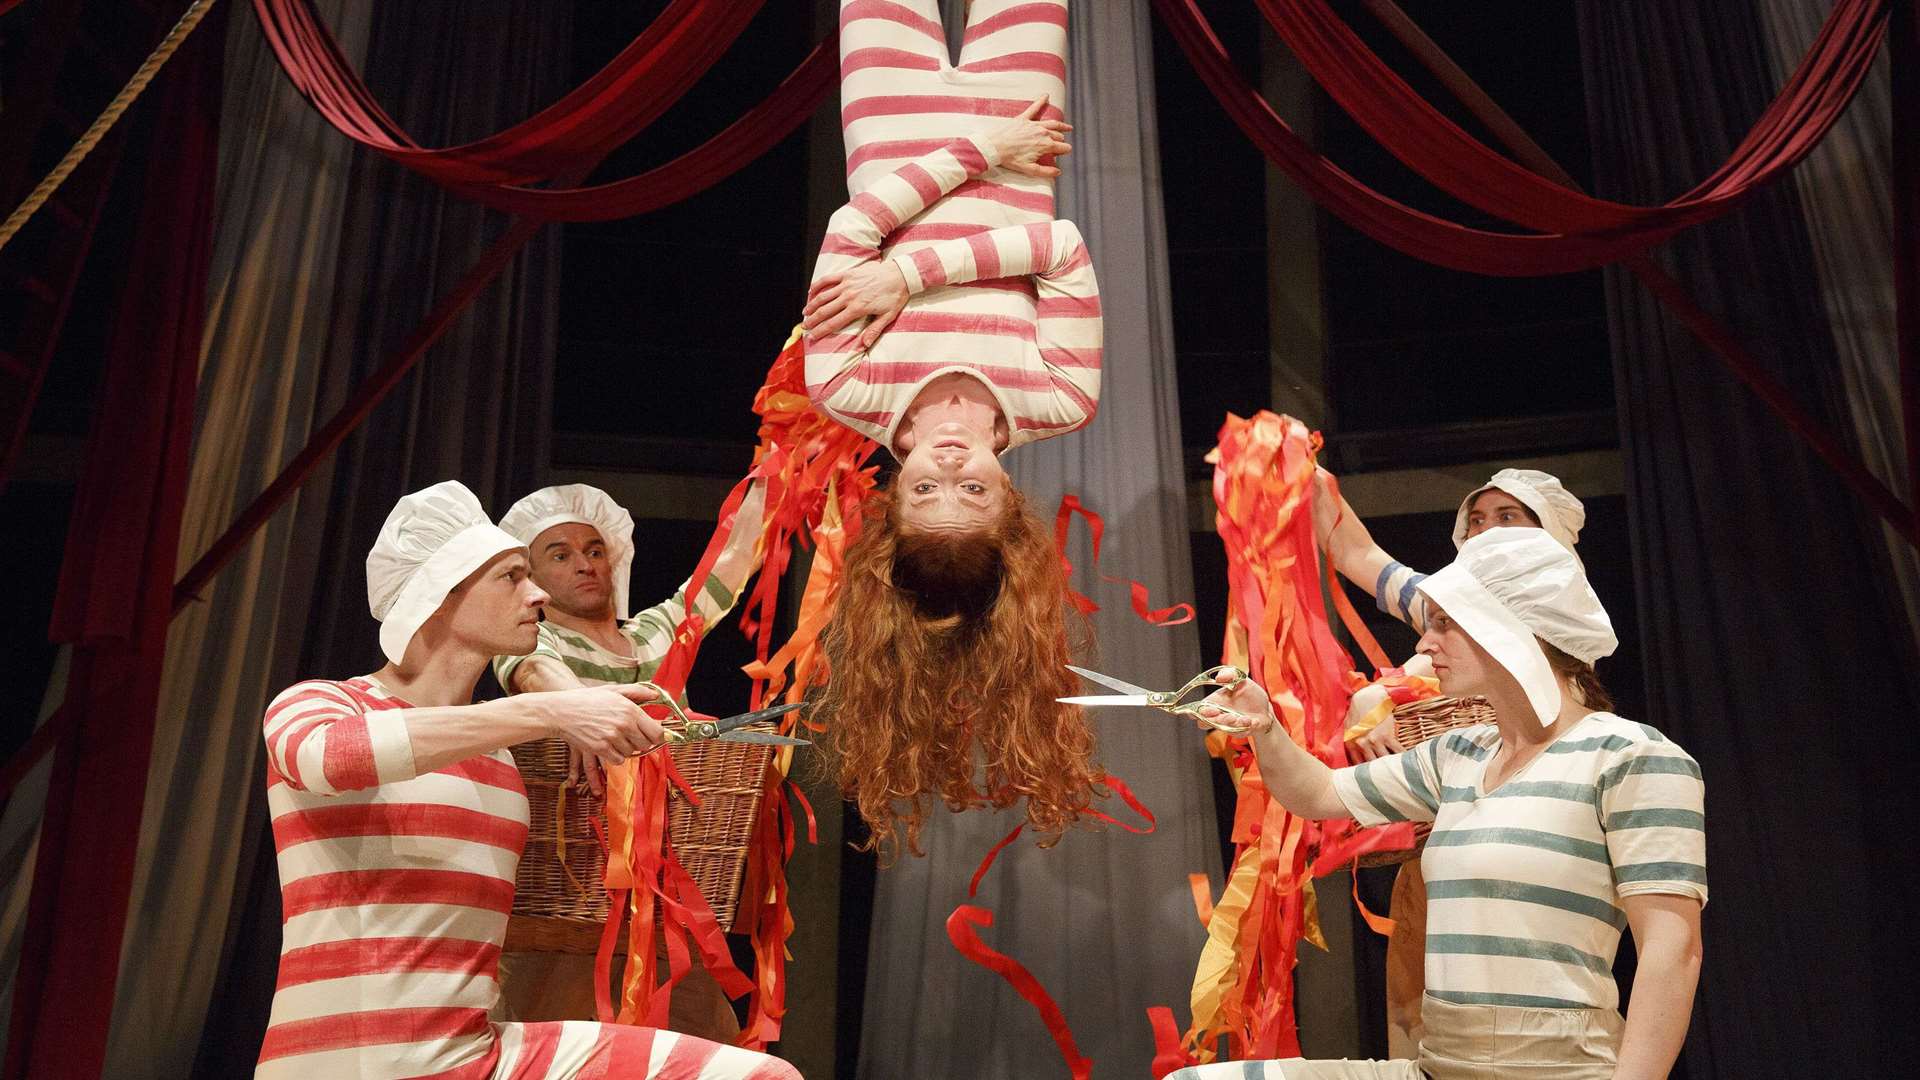 The children's book Hetty Feather is brought to life on stage